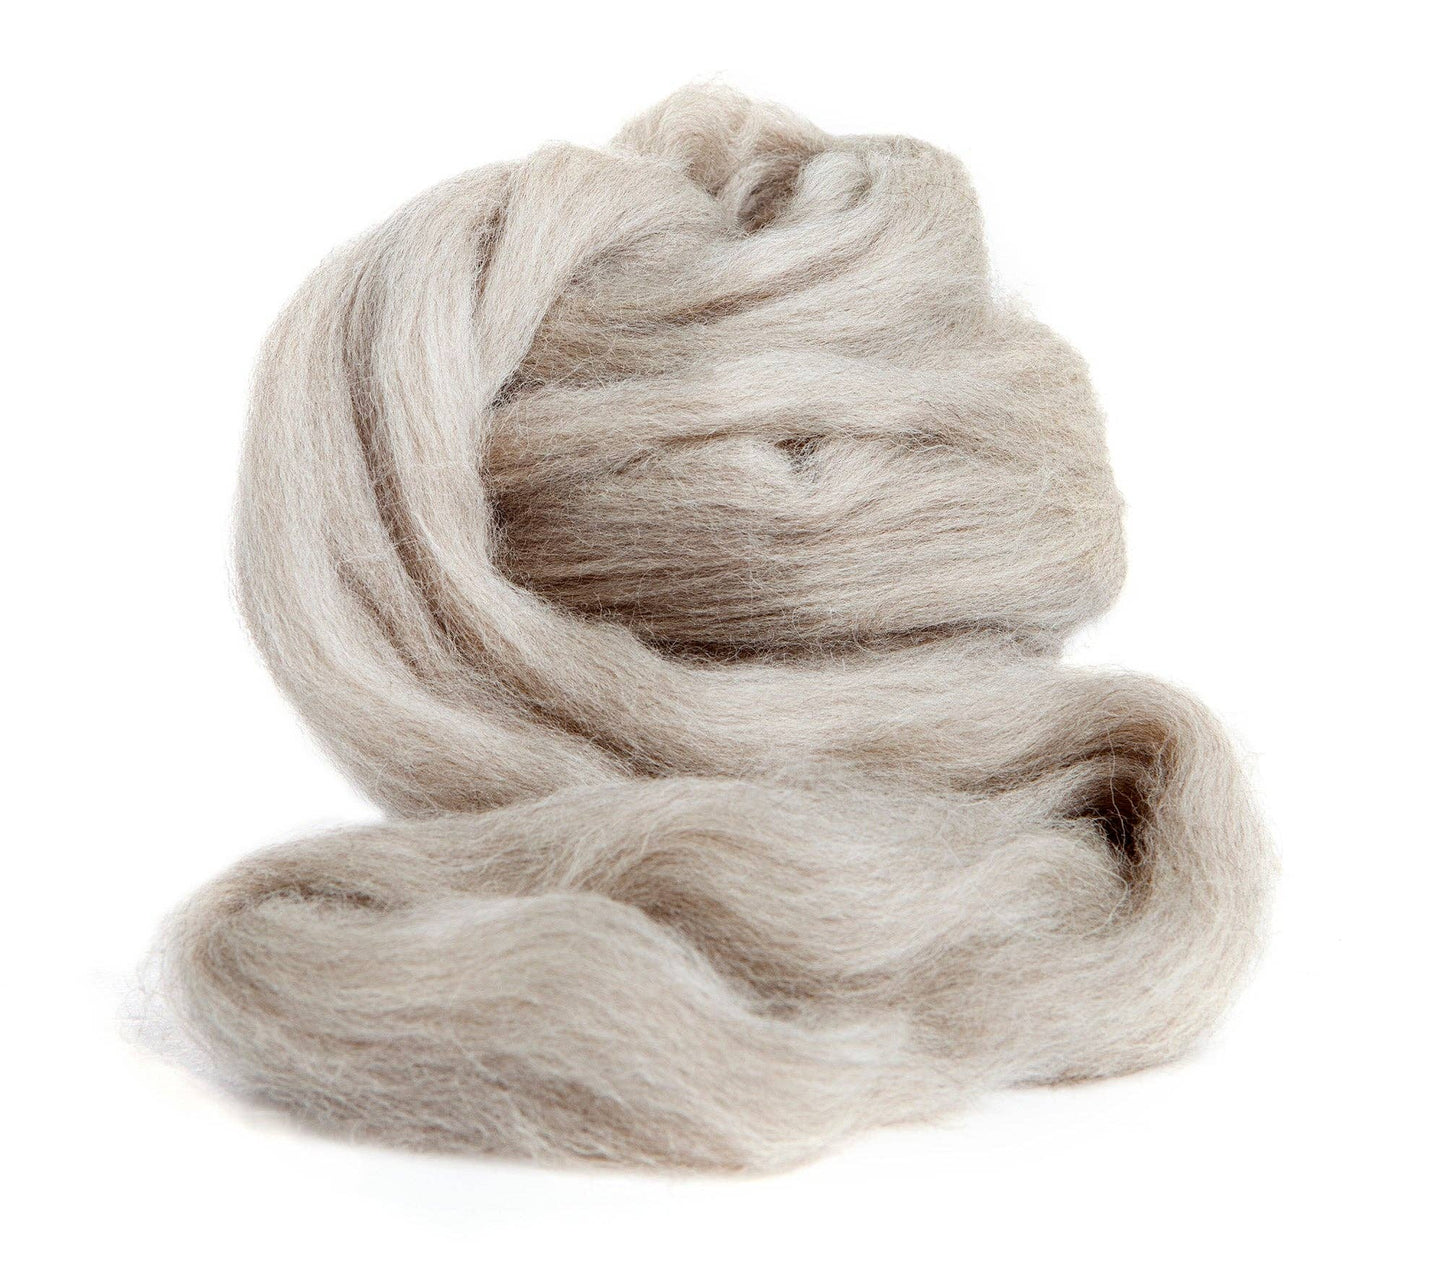 Corriedale Wool Roving Top, Natural Sand Color, 29.5 Micron